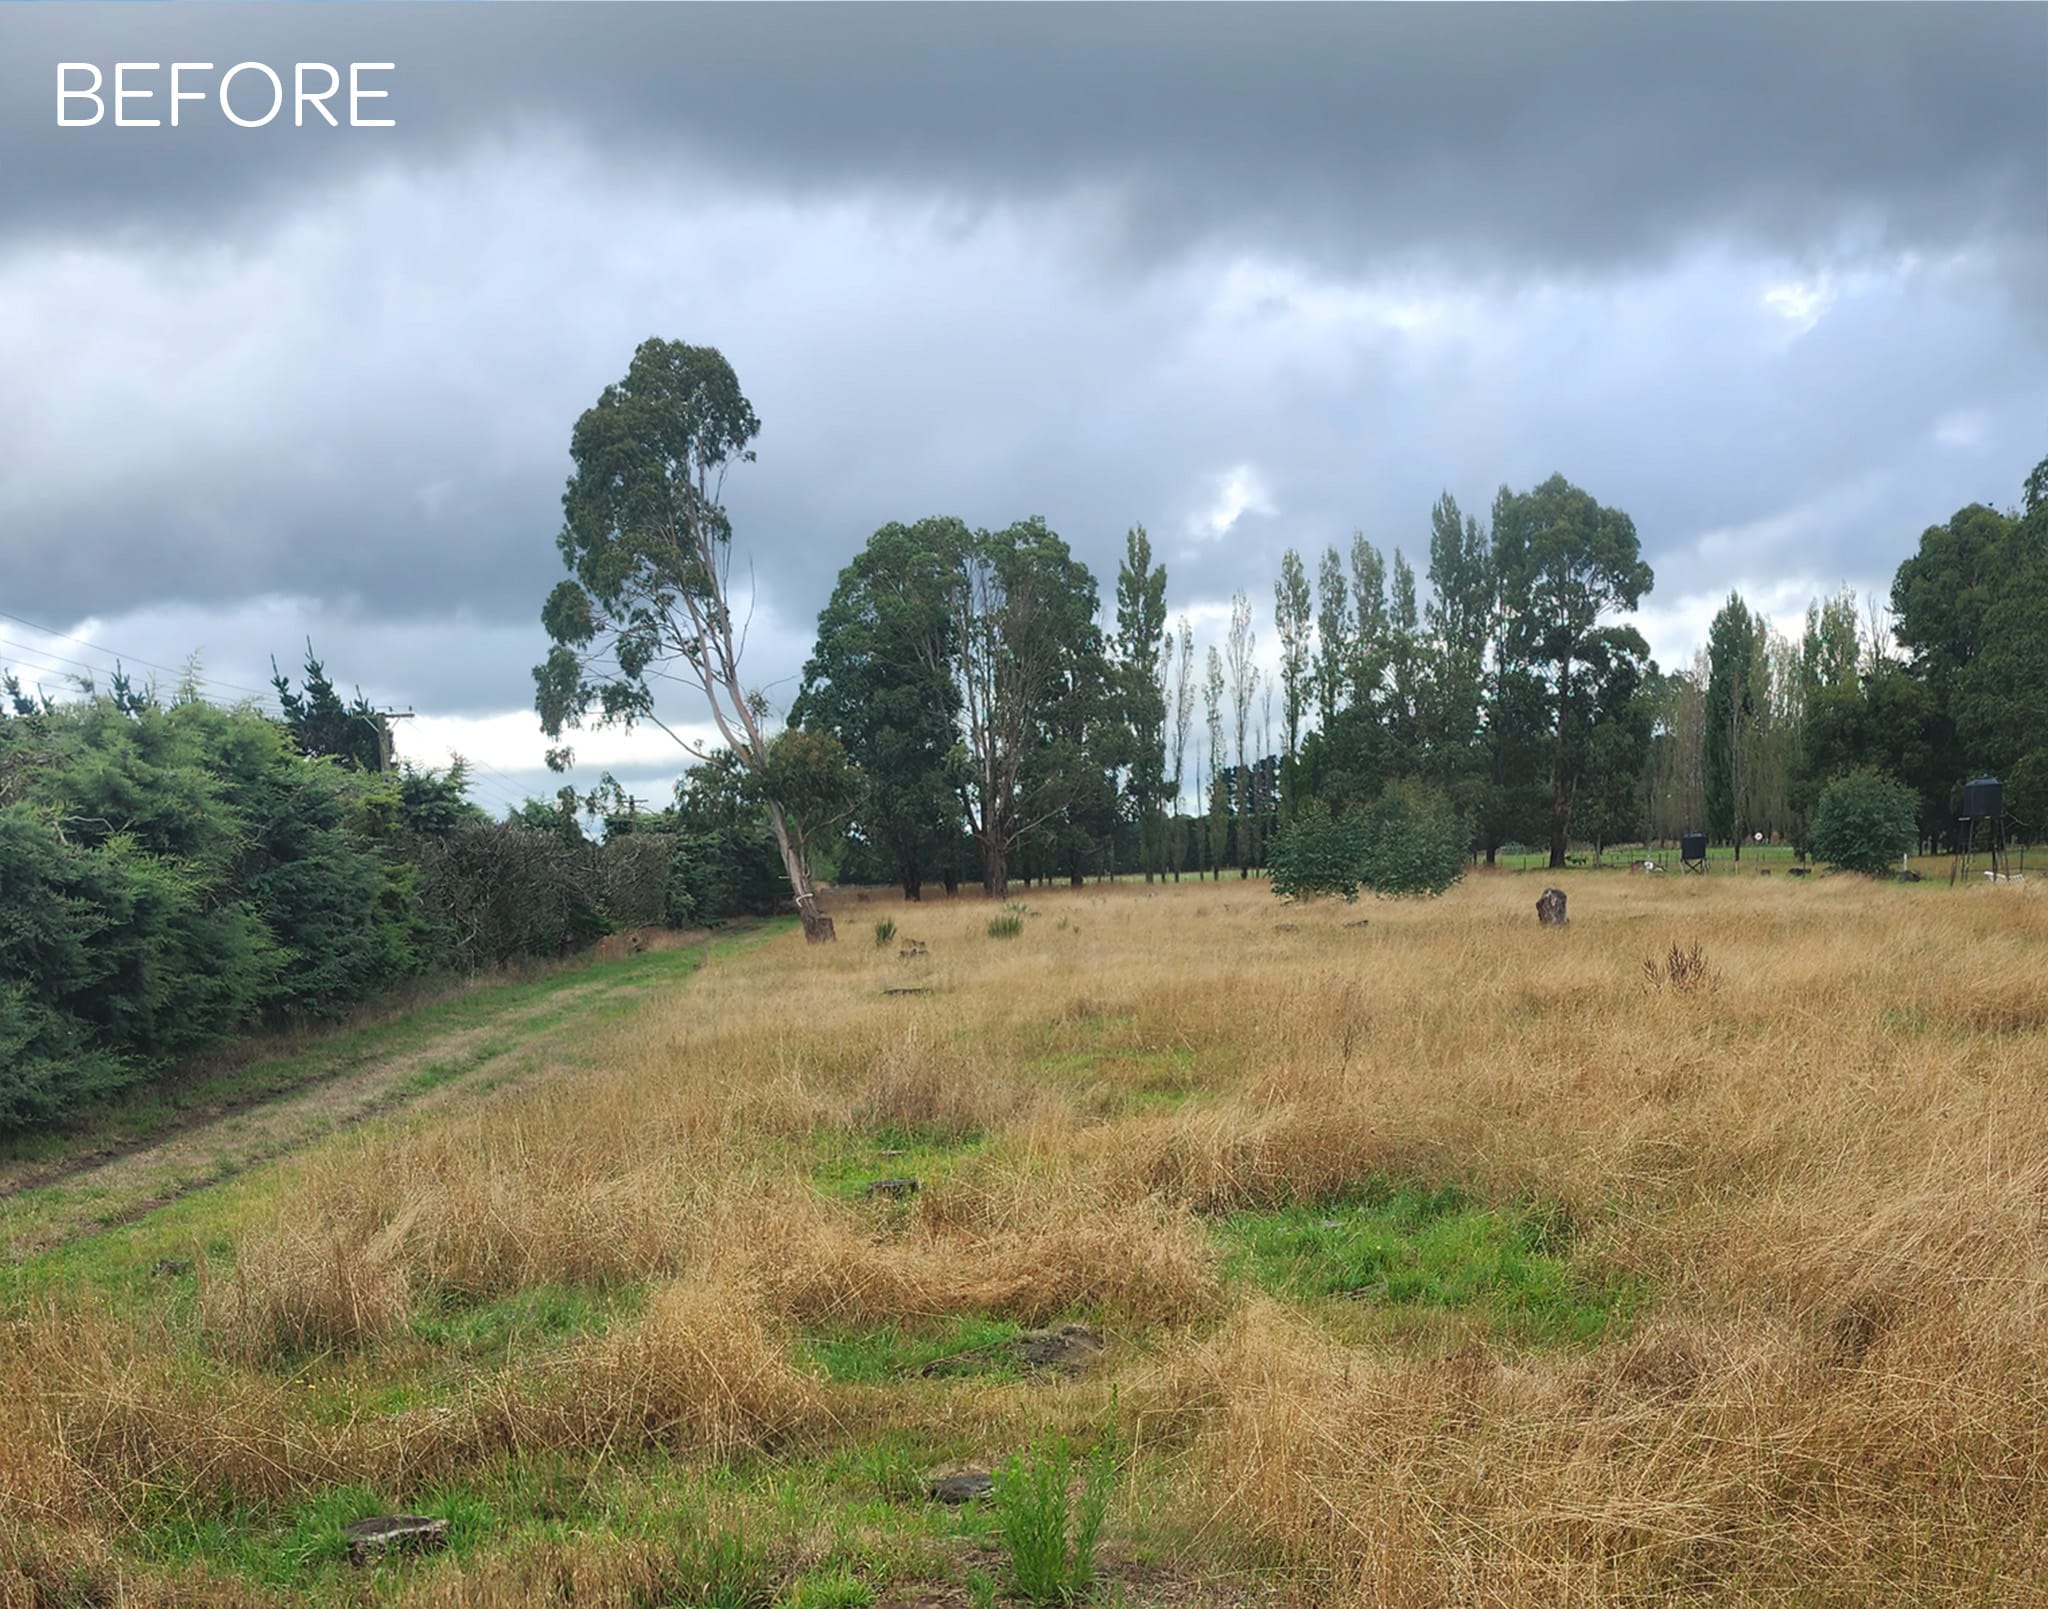 JG Trees land clearing services in North Canterbury before picture